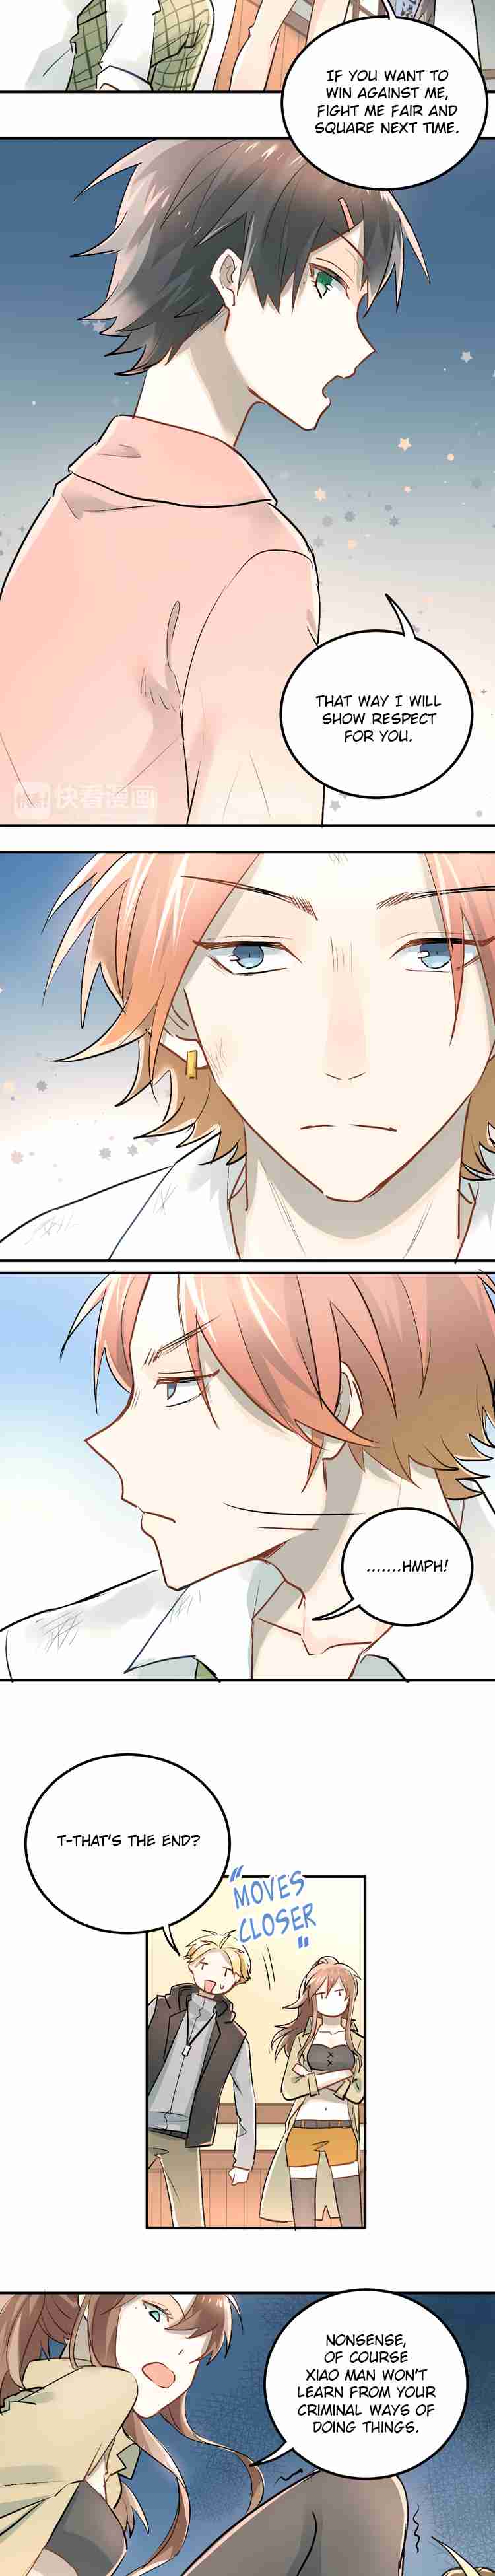 The Tyrant Falls In Love Ch. 20